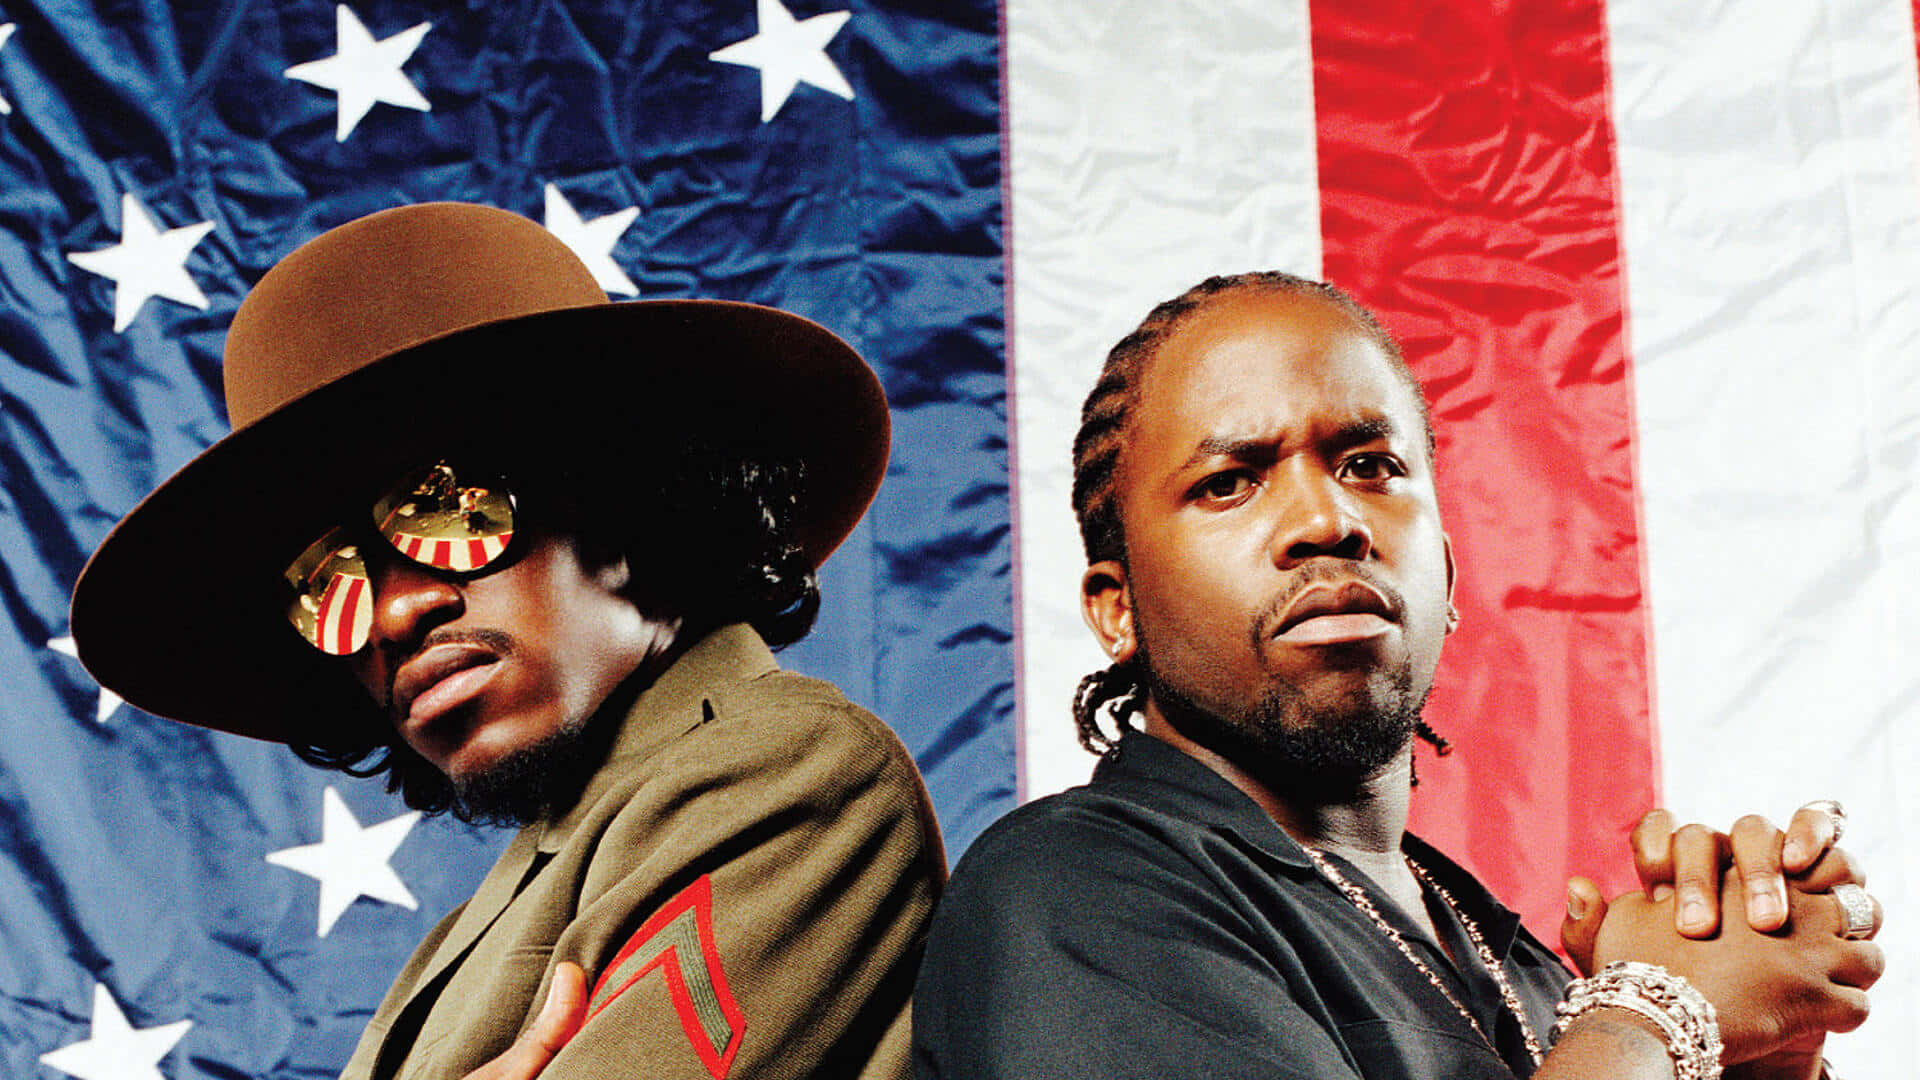 Big Boiand Andre3000 Against Flag Background Wallpaper